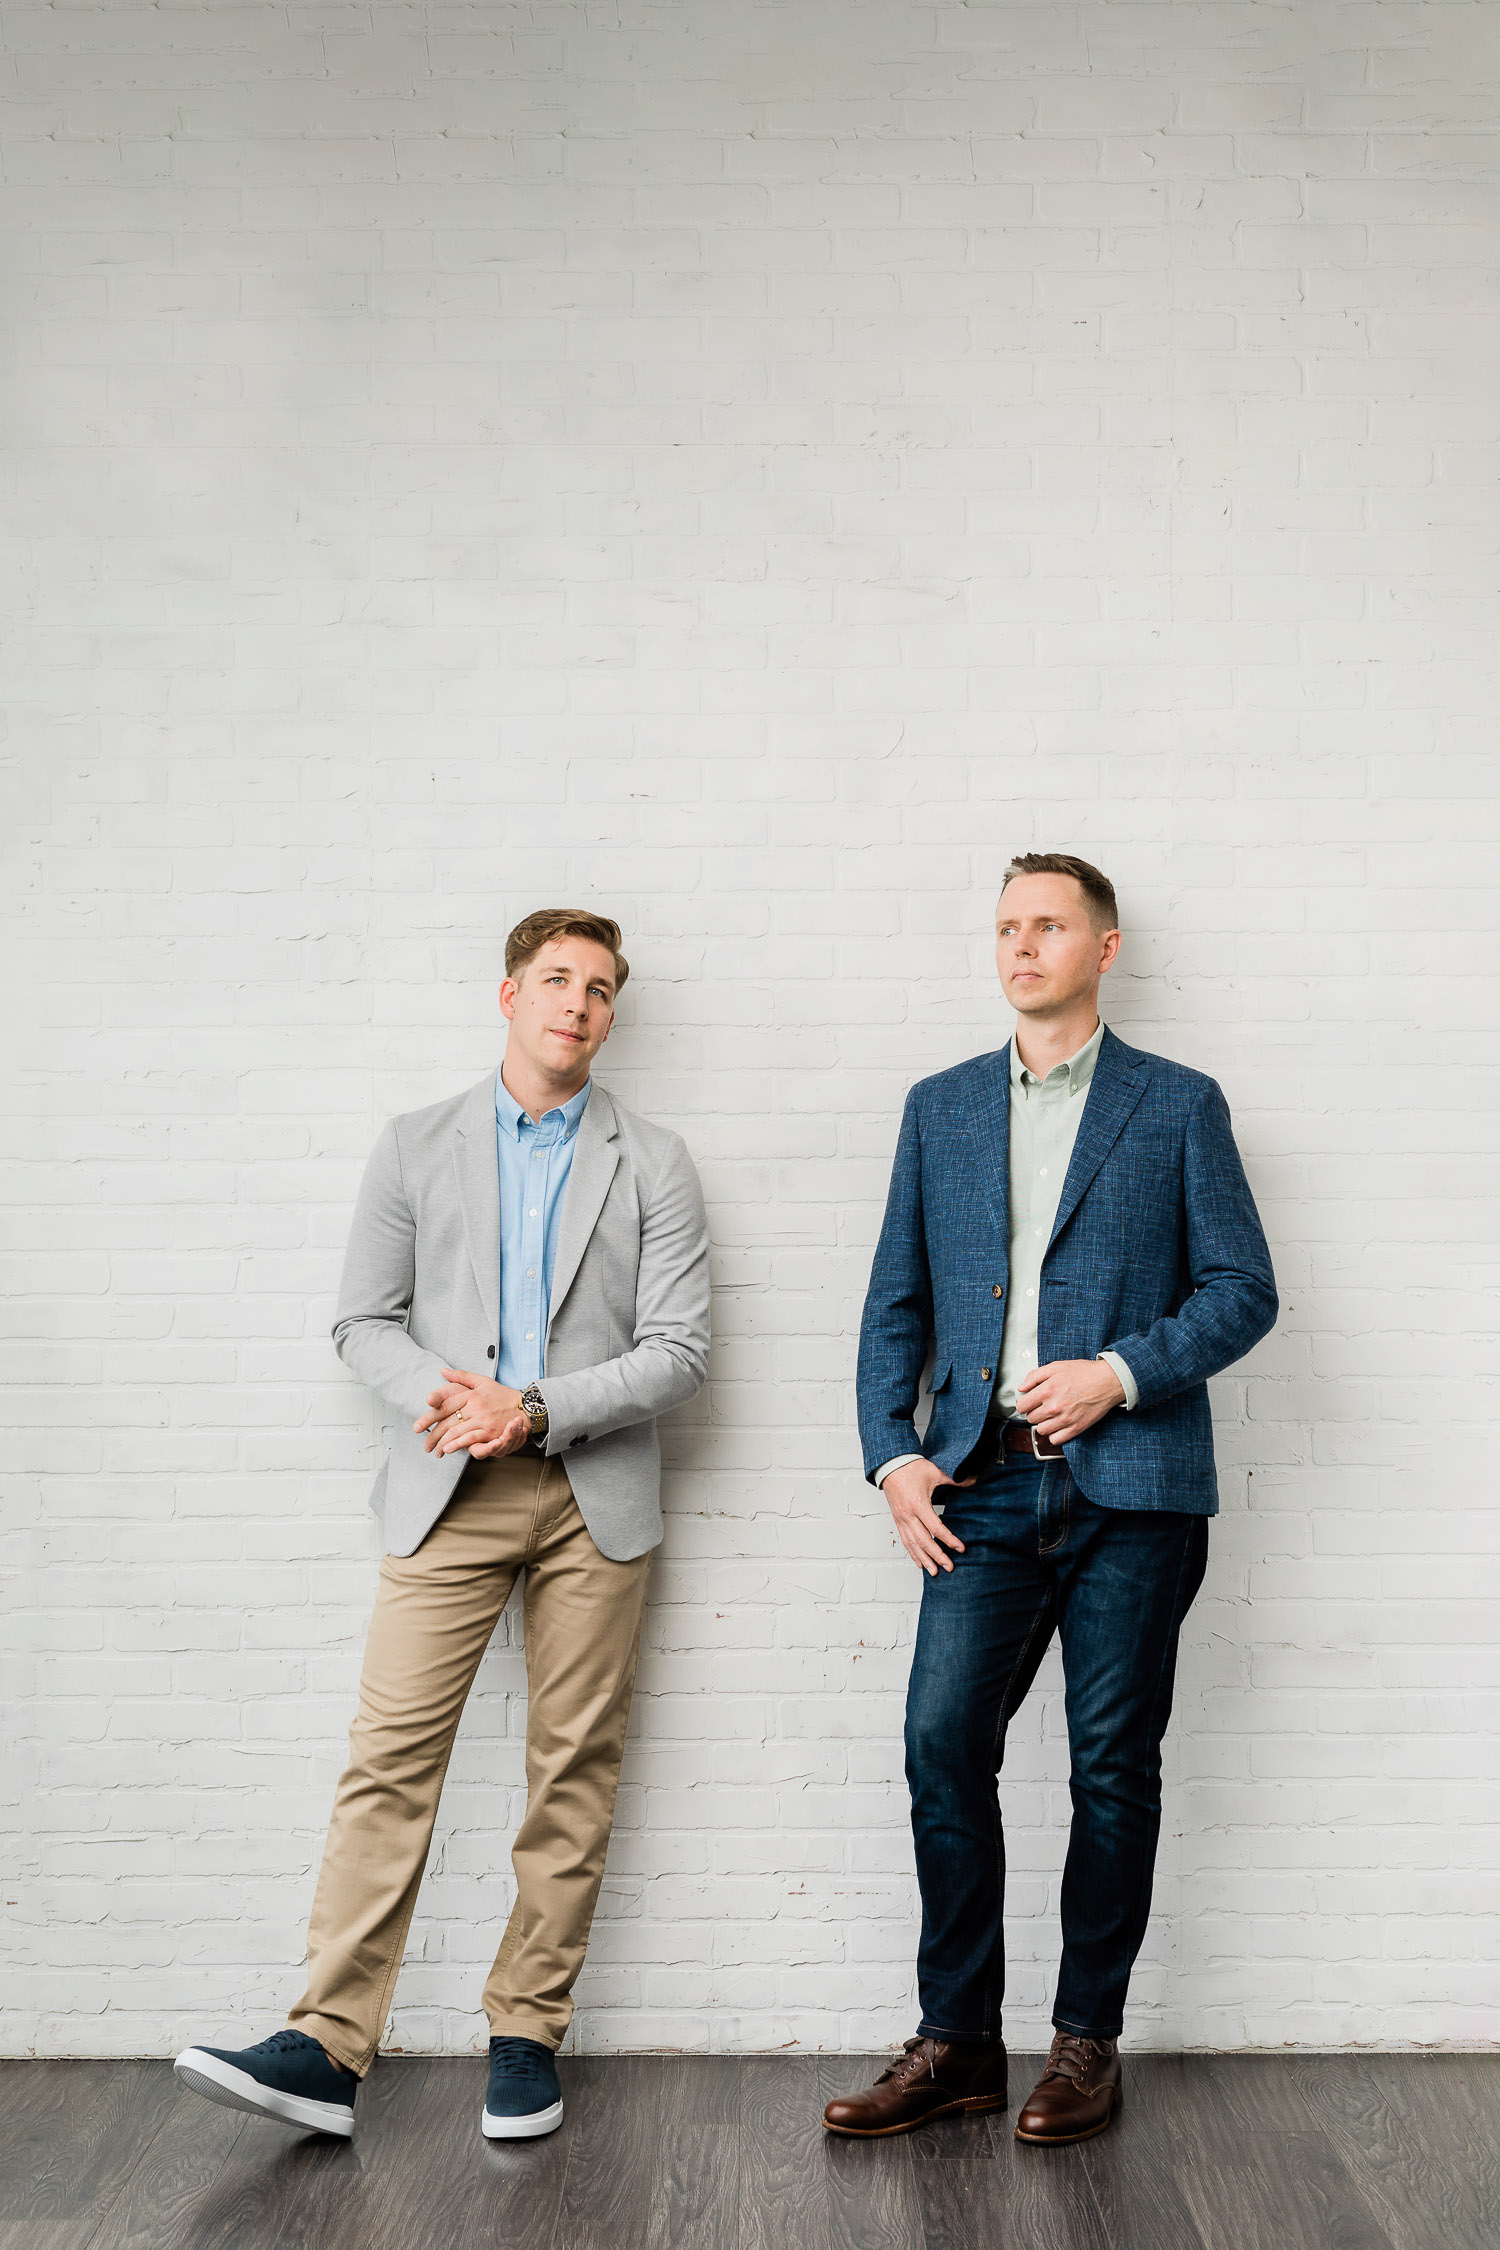 Two architects posing agains a wall for a brand session